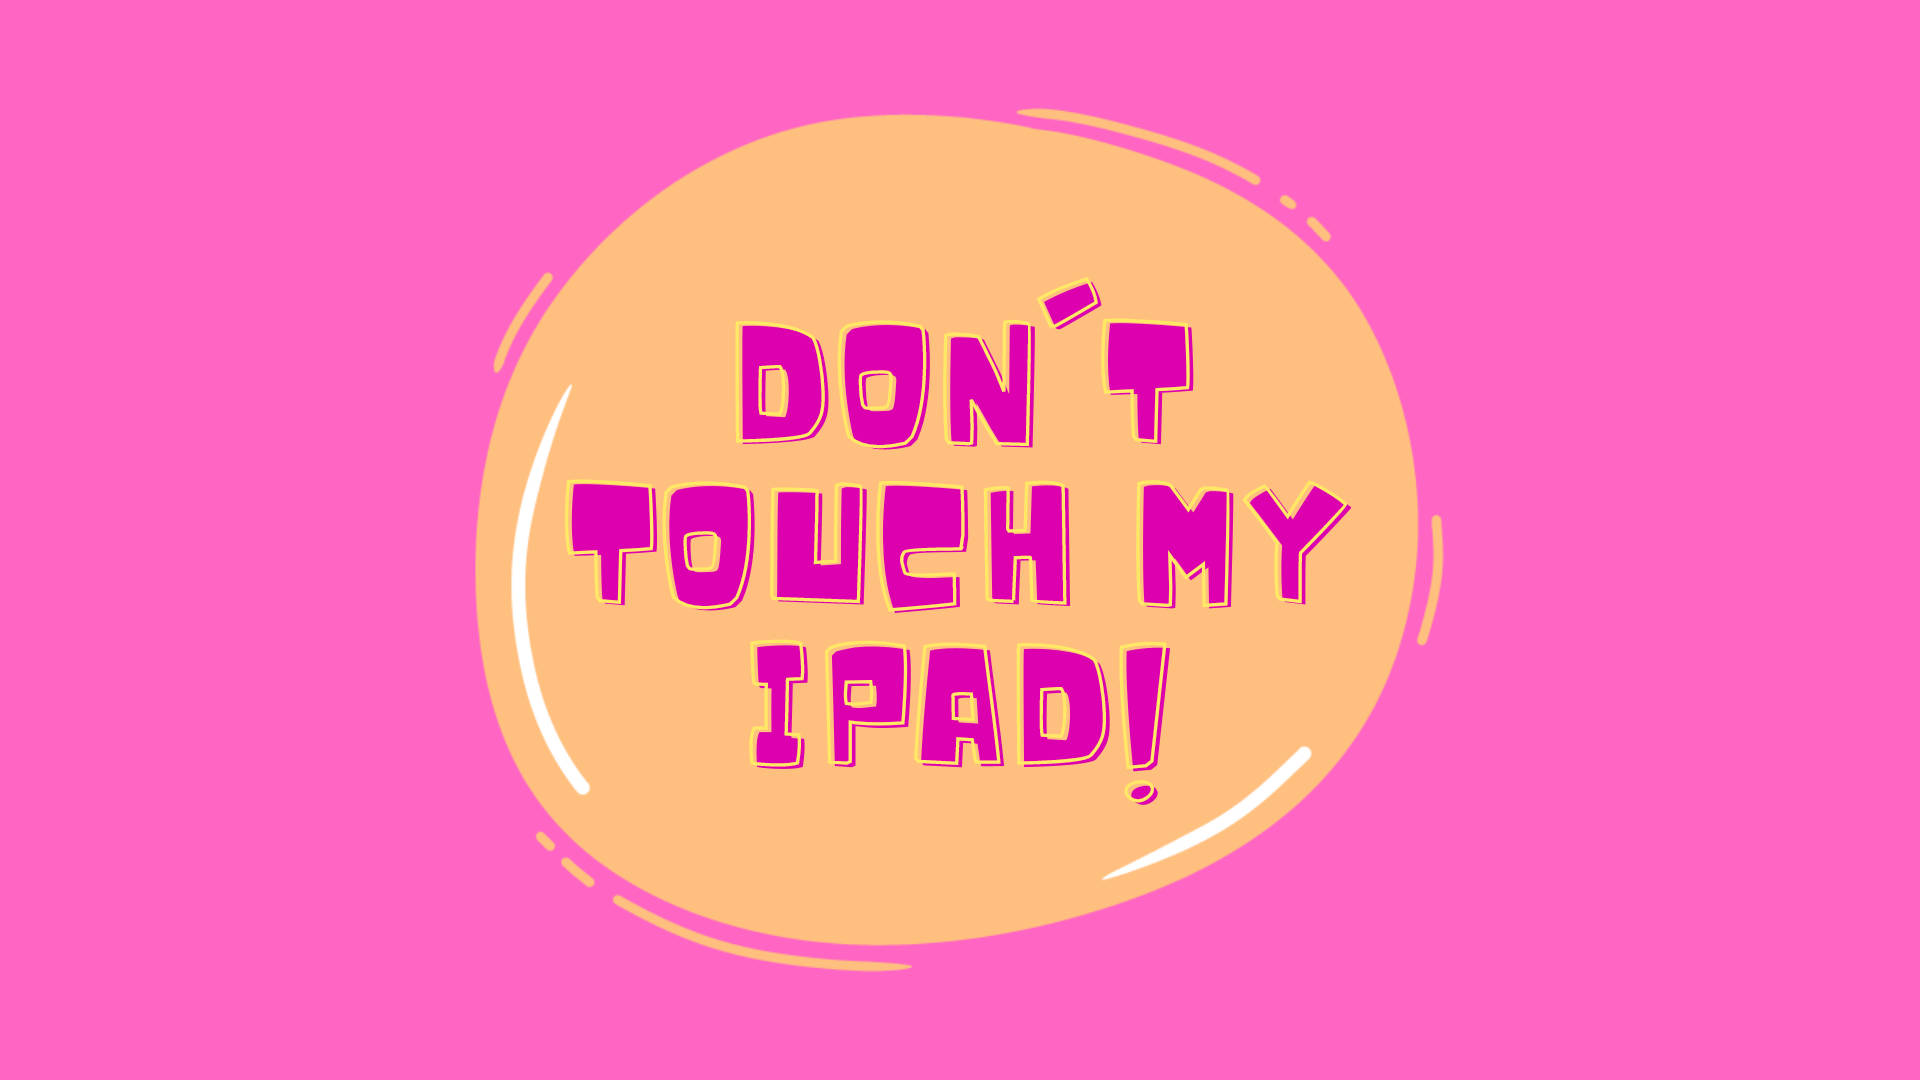 Images By Wallpapers Phonepad Hd On 916 Phone in 2023  Dont touch my  phone wallpapers Ipad wallpaper Dont touch